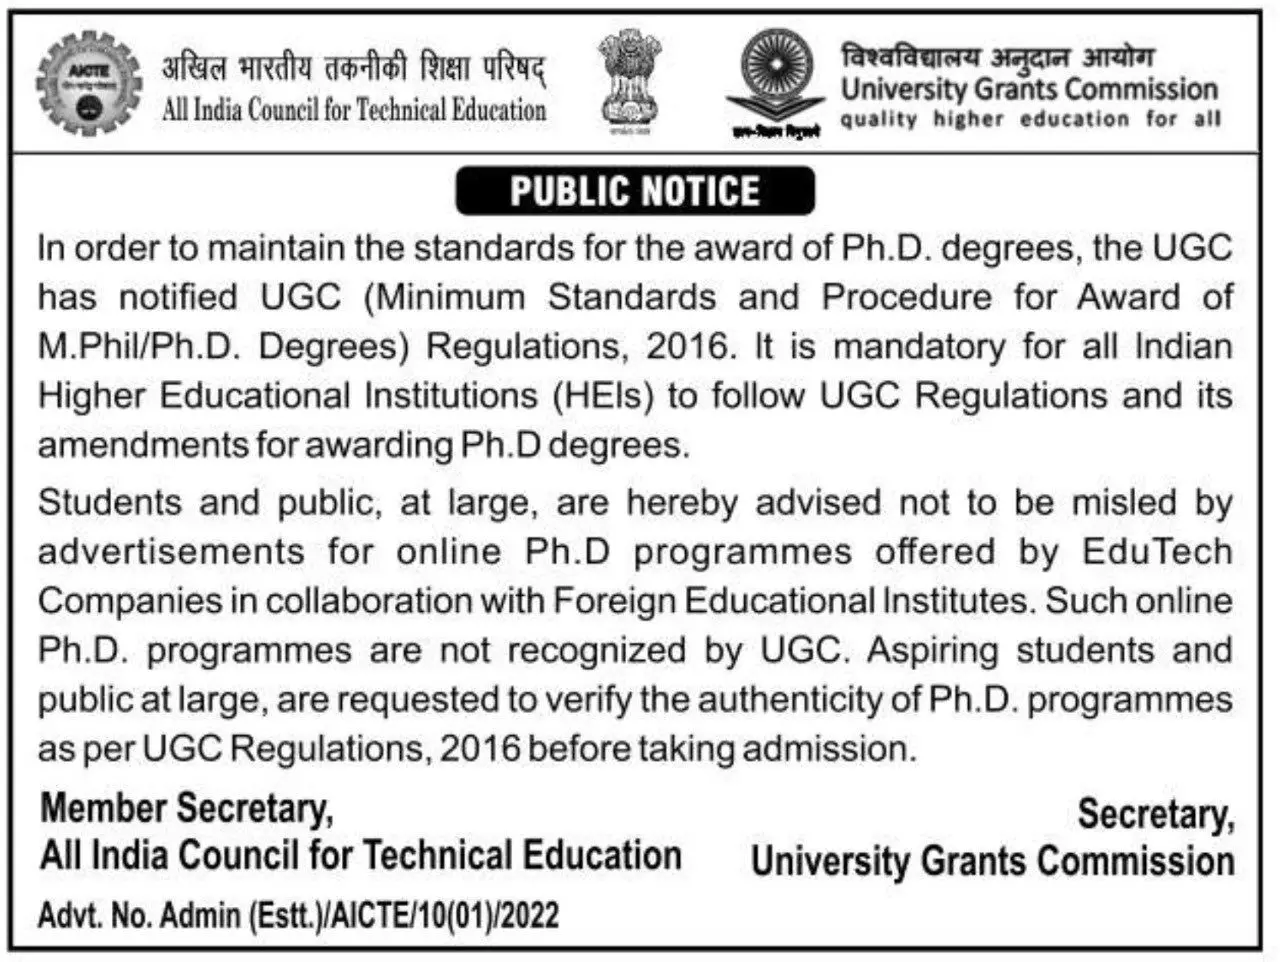 UGC warns students about online Ph.D. programmes offered by Edu-Tech firms